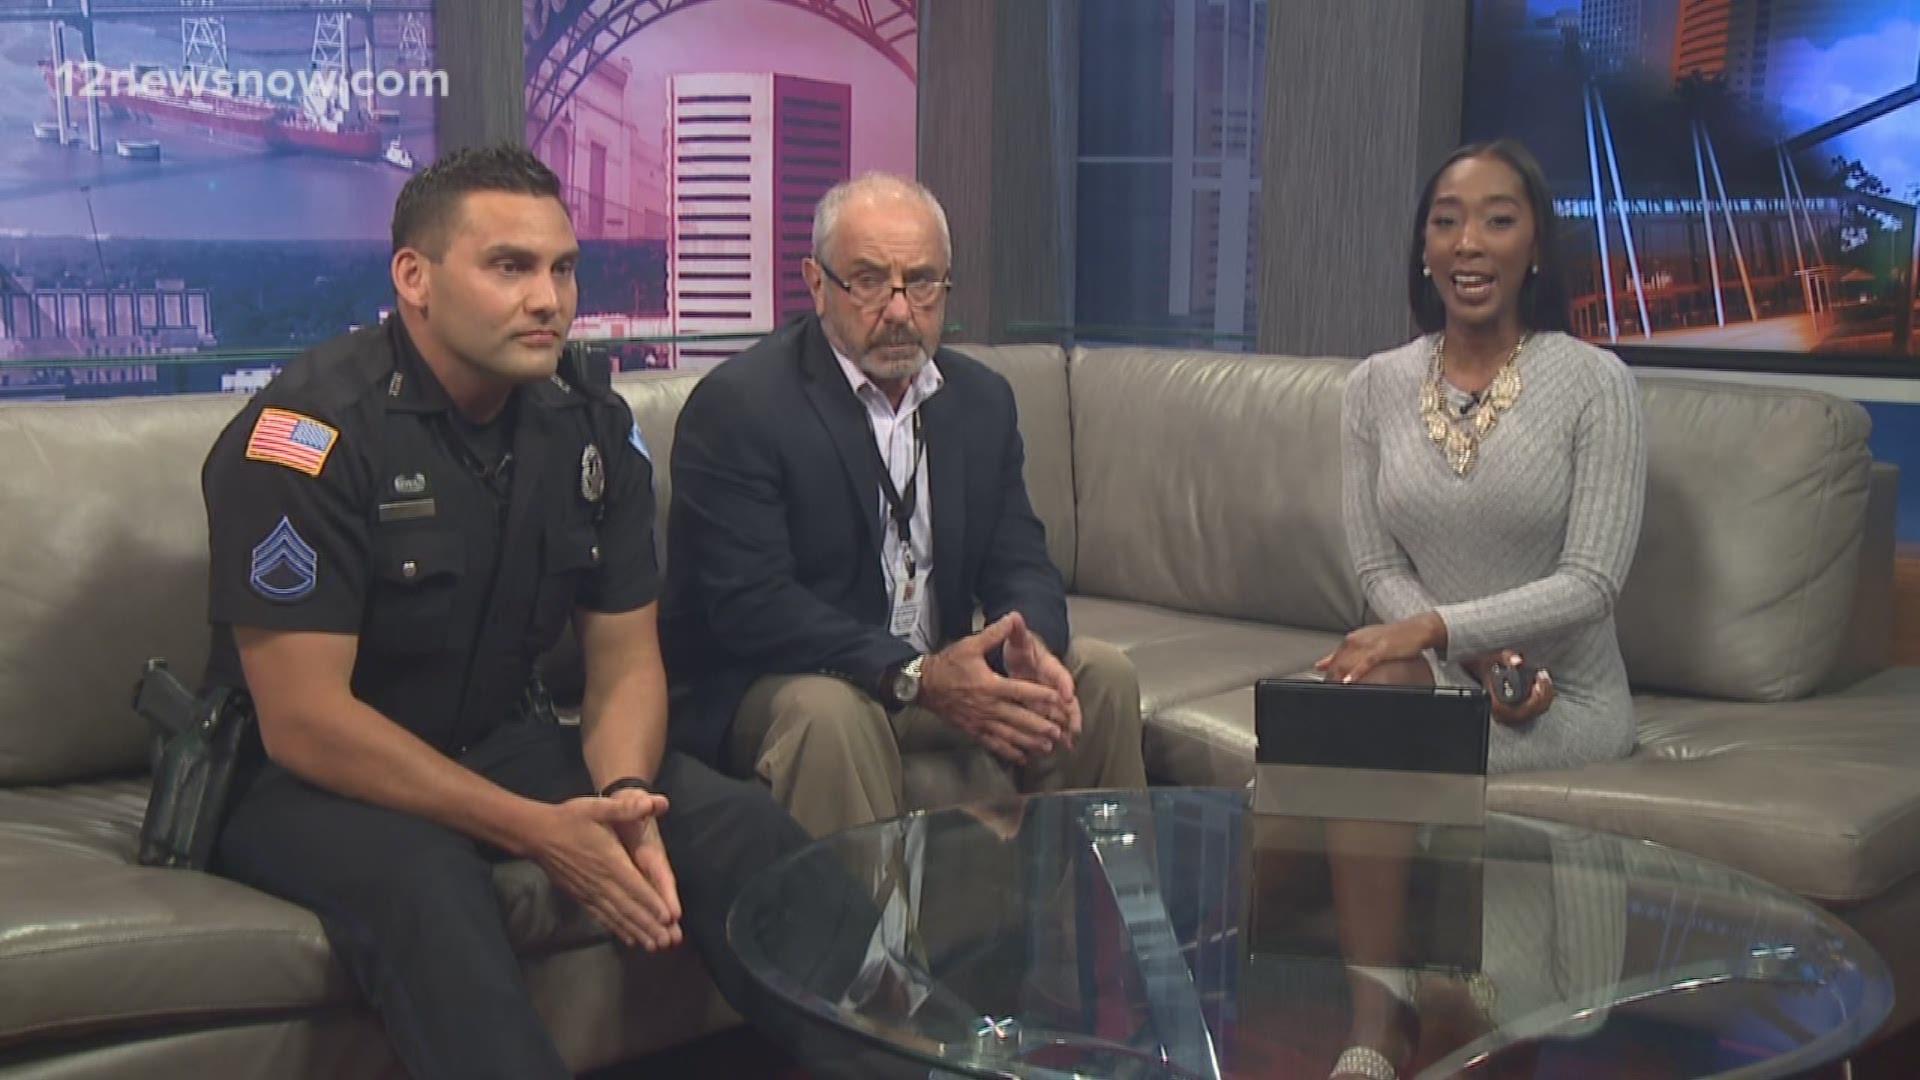 Beaumont Police Chief Jim Singletary and Sergeant Cody Guedry are talking about what to do if a random car follows you home, who gets ticketed if a passenger is not wearing a seatbelt, and when can your child stop using a booster seat in the car.